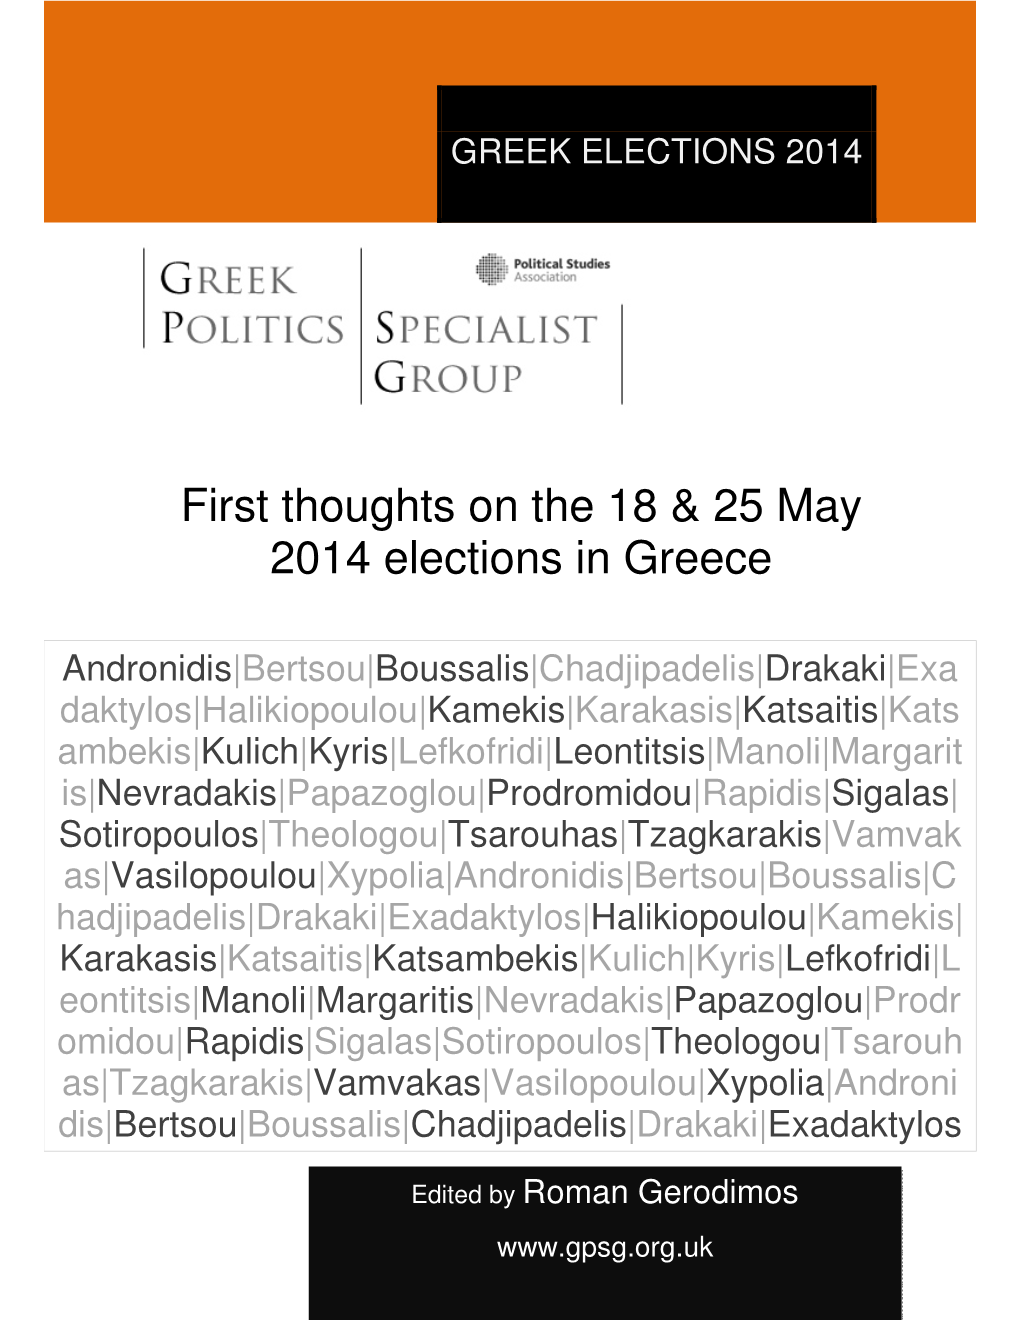 First Thoughts on the 18 & 25 May 2014 Elections in Greece